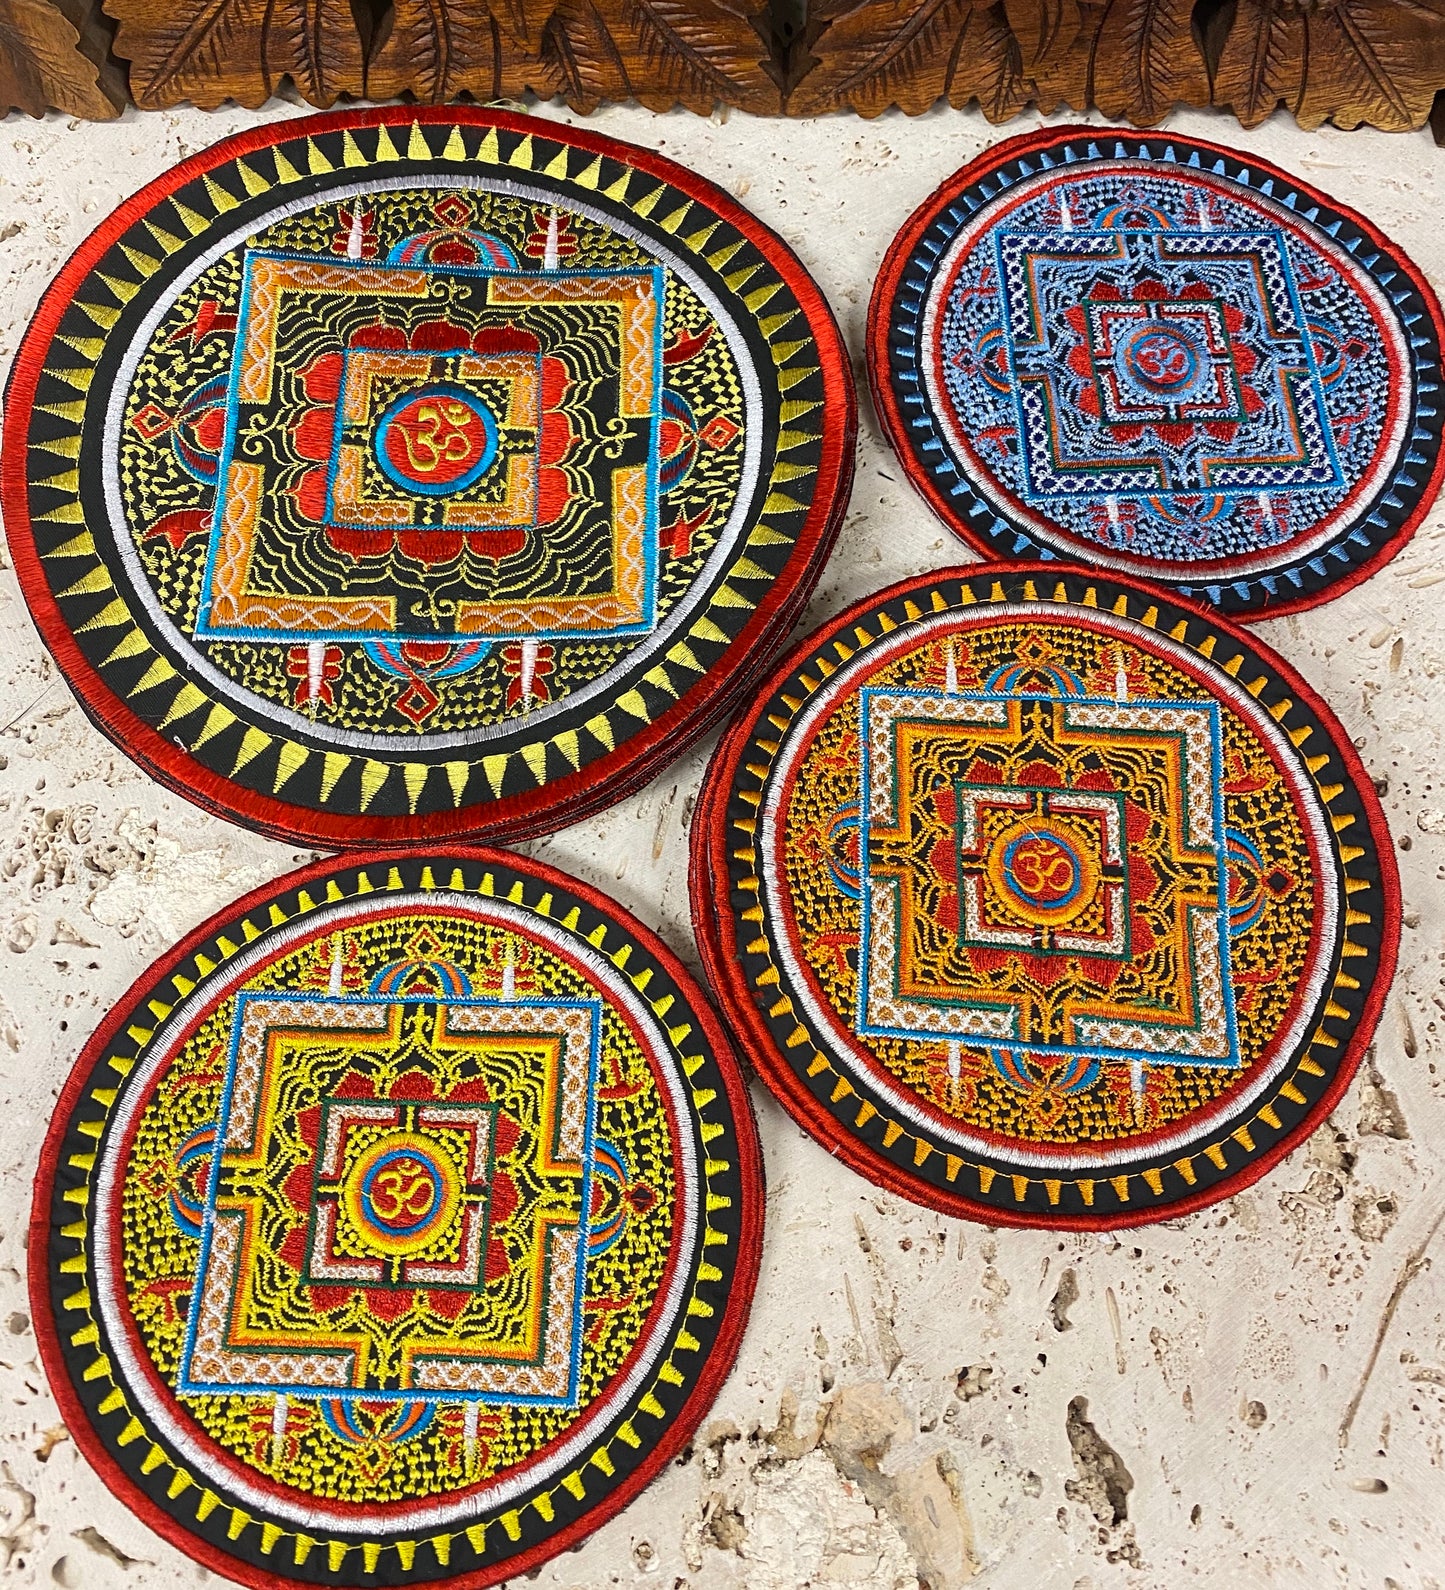 Handmade Embroidered Om Mandala Patches